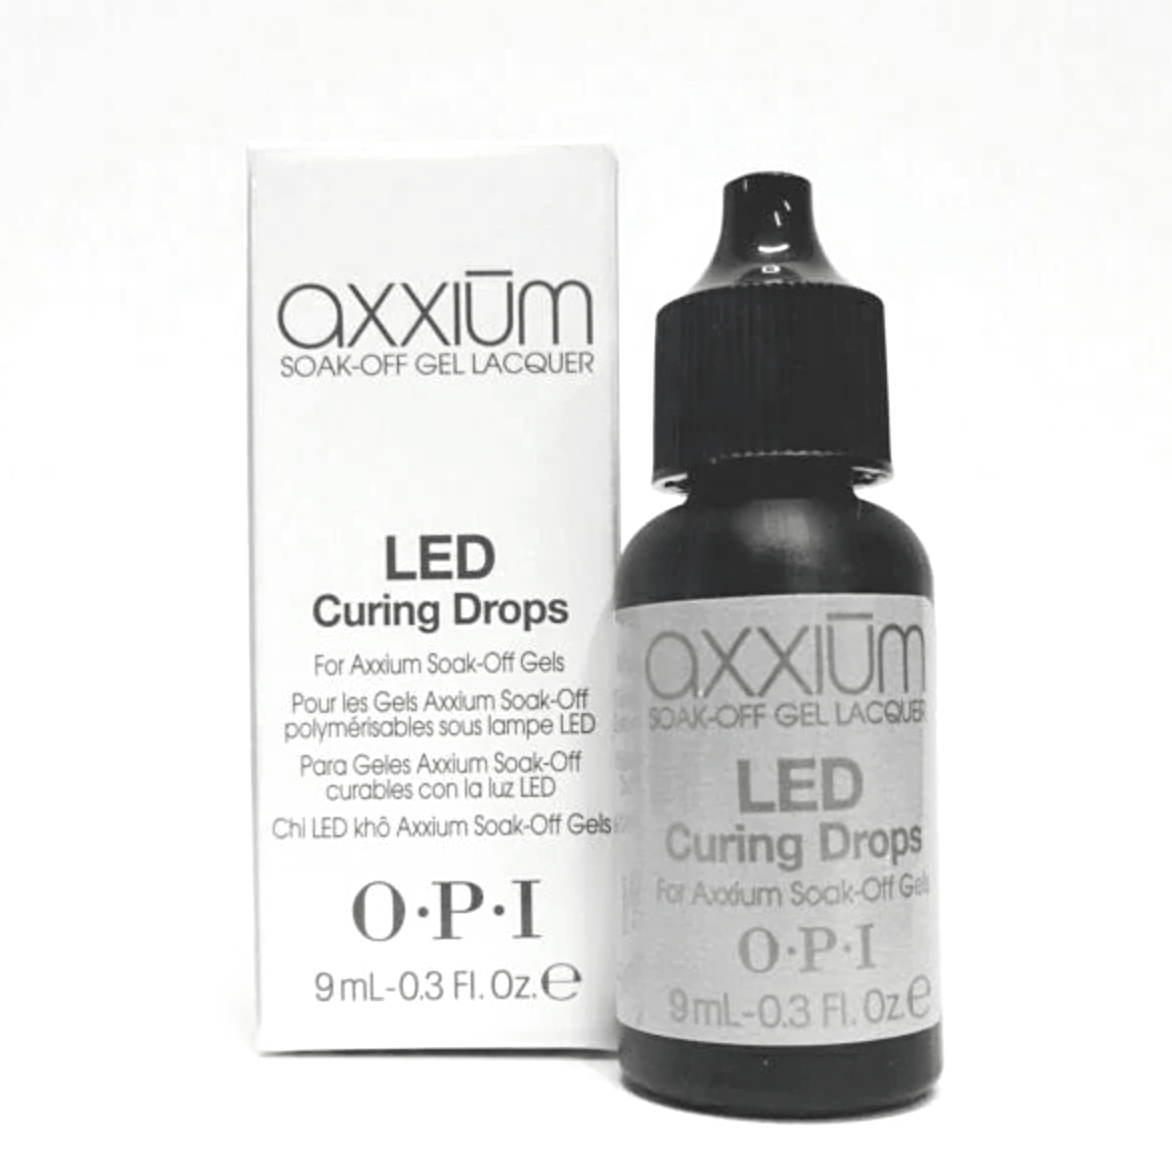 OPI AXXIUM SoakOff Gel Lacquer LED Curing Drops (9ml/0.3 oz)